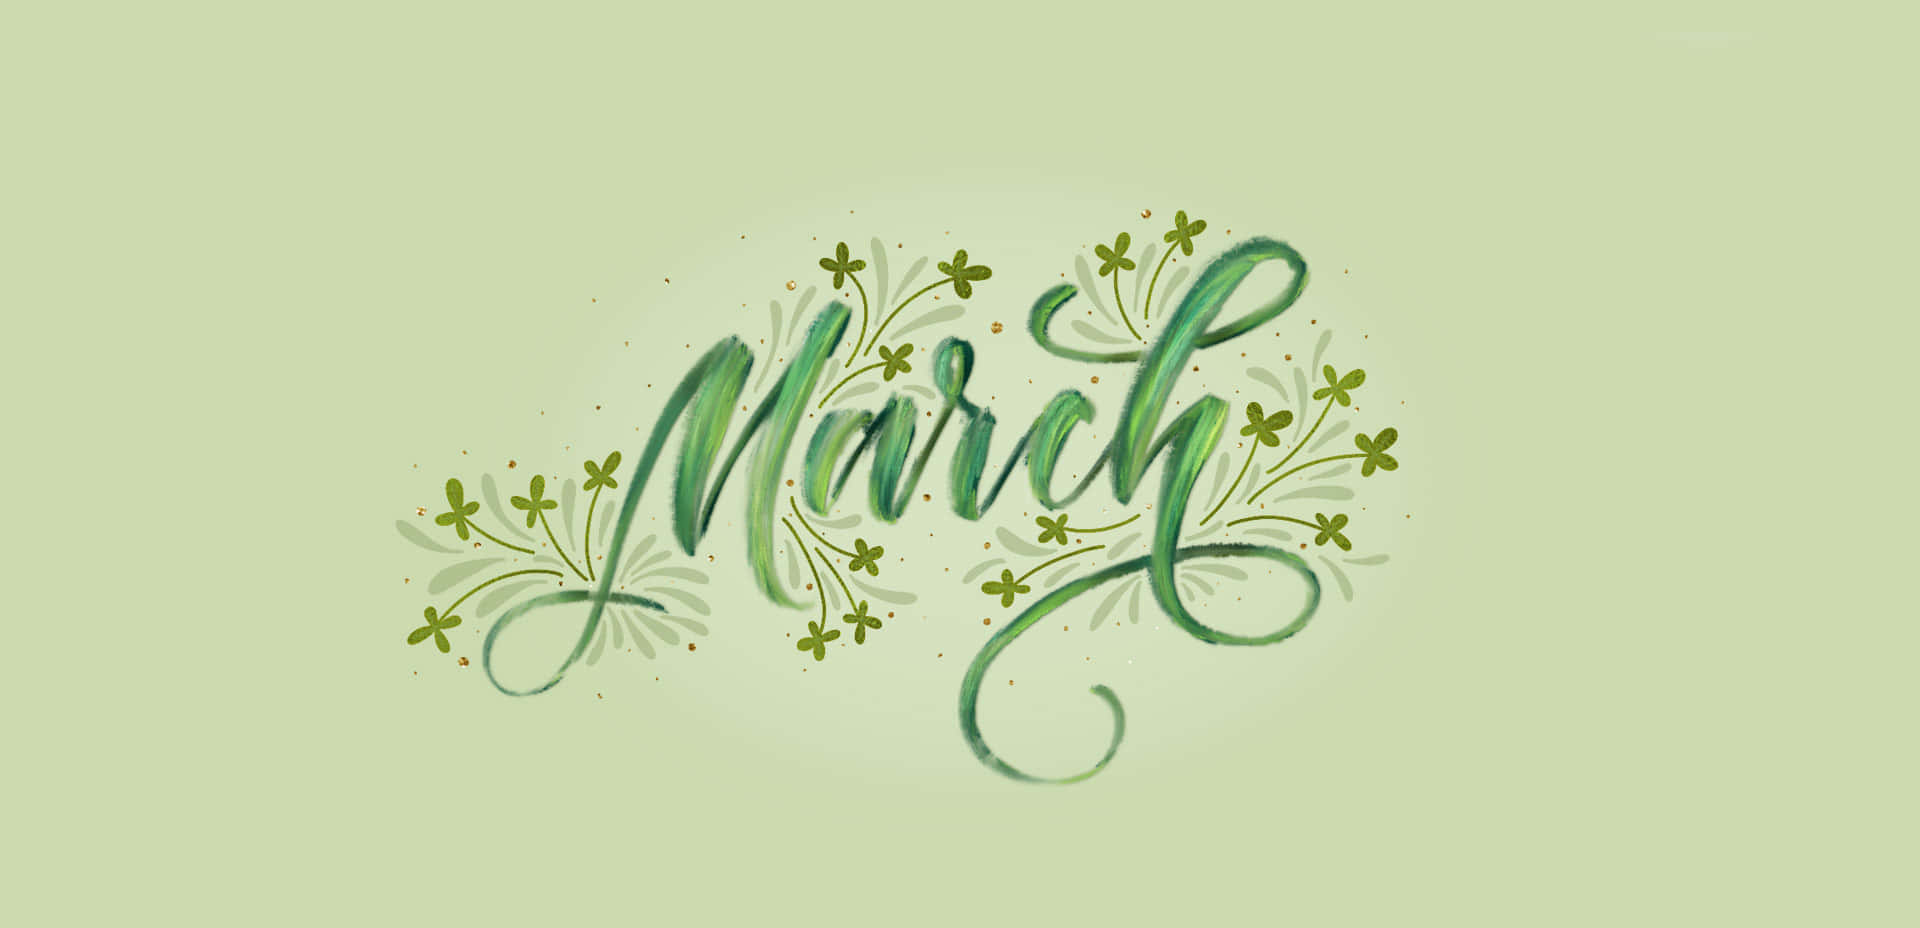 March Floral Calligraphy Wallpaper